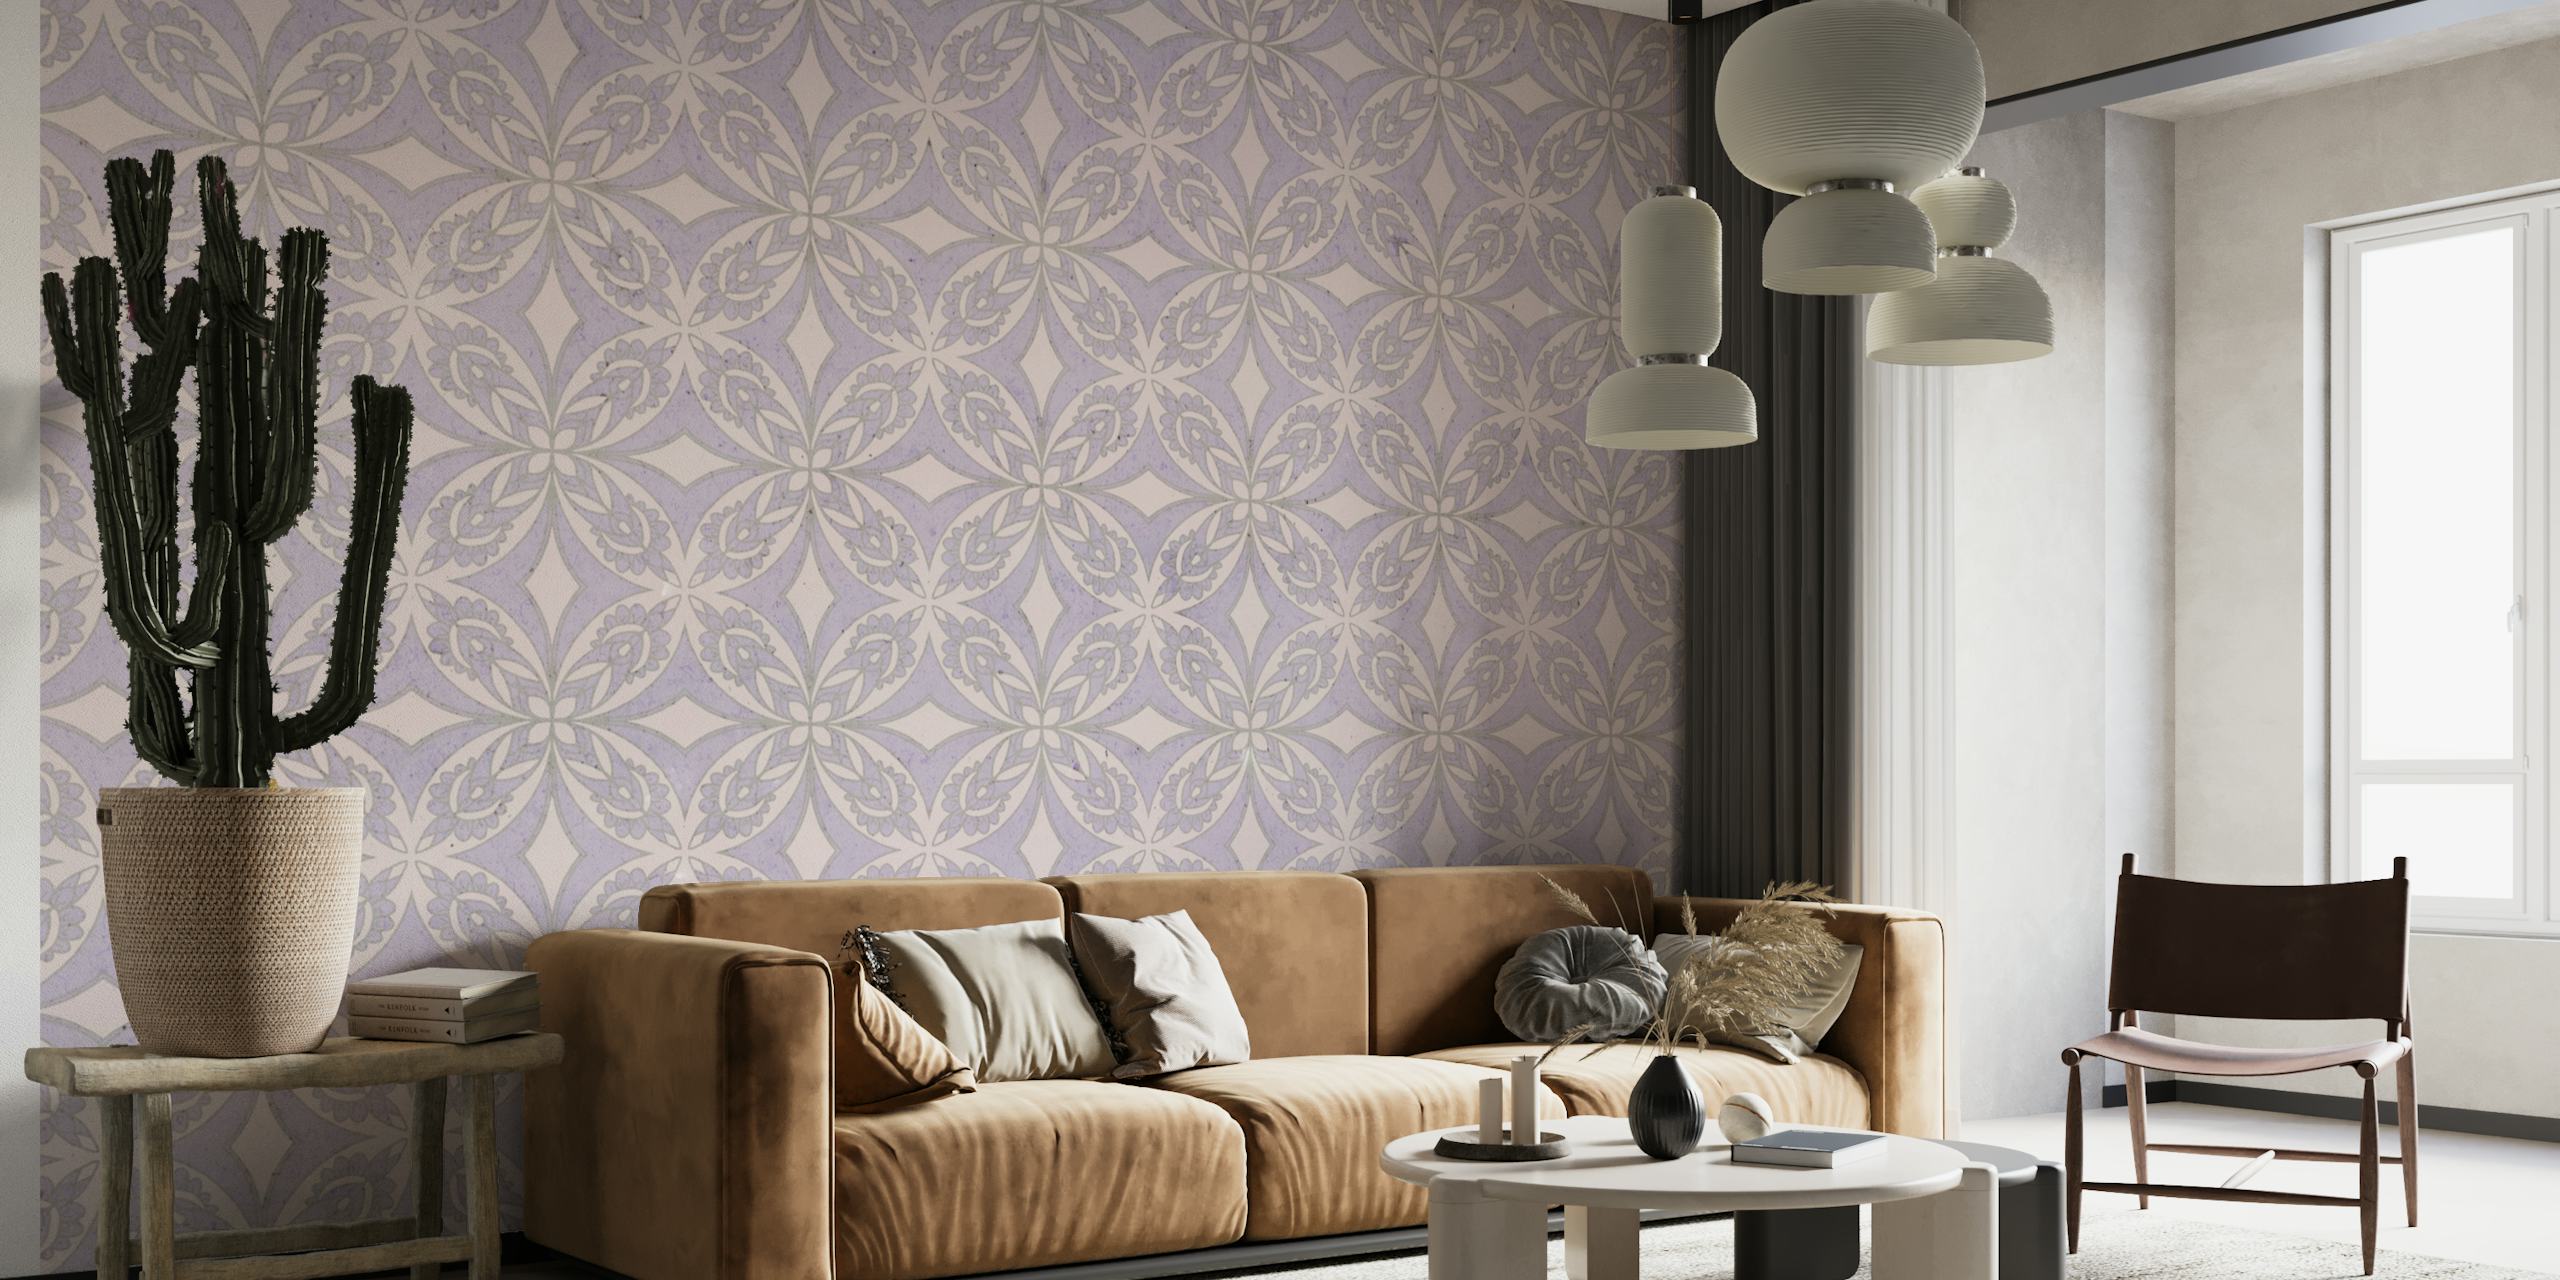 Elegant purple tile pattern wall mural with geometric and floral designs